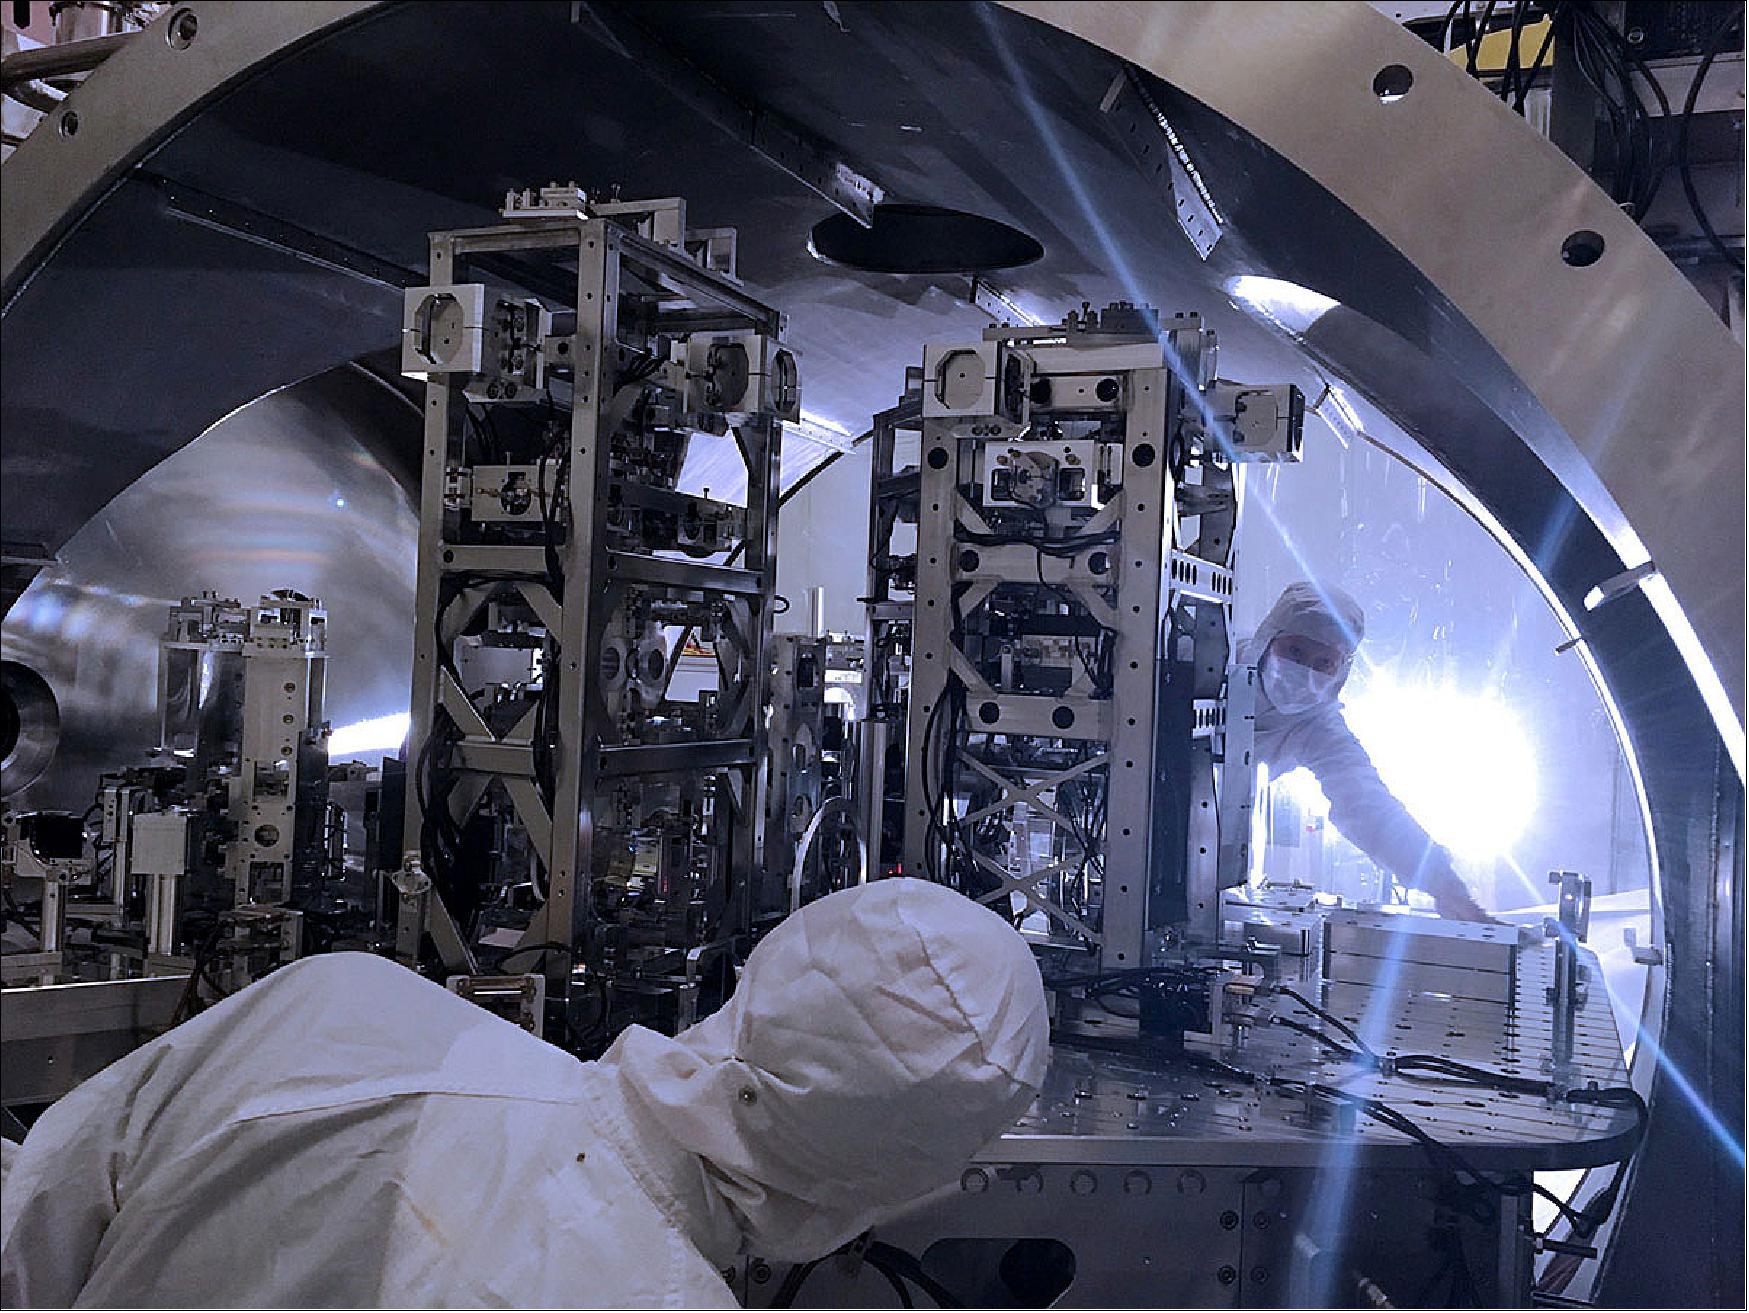 Figure 40: Engineers Hugh Radkins and Betsy Weaver at work inside the vacuum system of the detector at LIGO Hanford Observatory, Washington, USA, during recent hardware upgrades. With the upgrades complete, the two U.S. LIGO facilities, in partnership with the Virgo facility in Italy, are now poised to begin third observation run (image credit: LIGO/Caltech/MIT/Jeff Kissel)